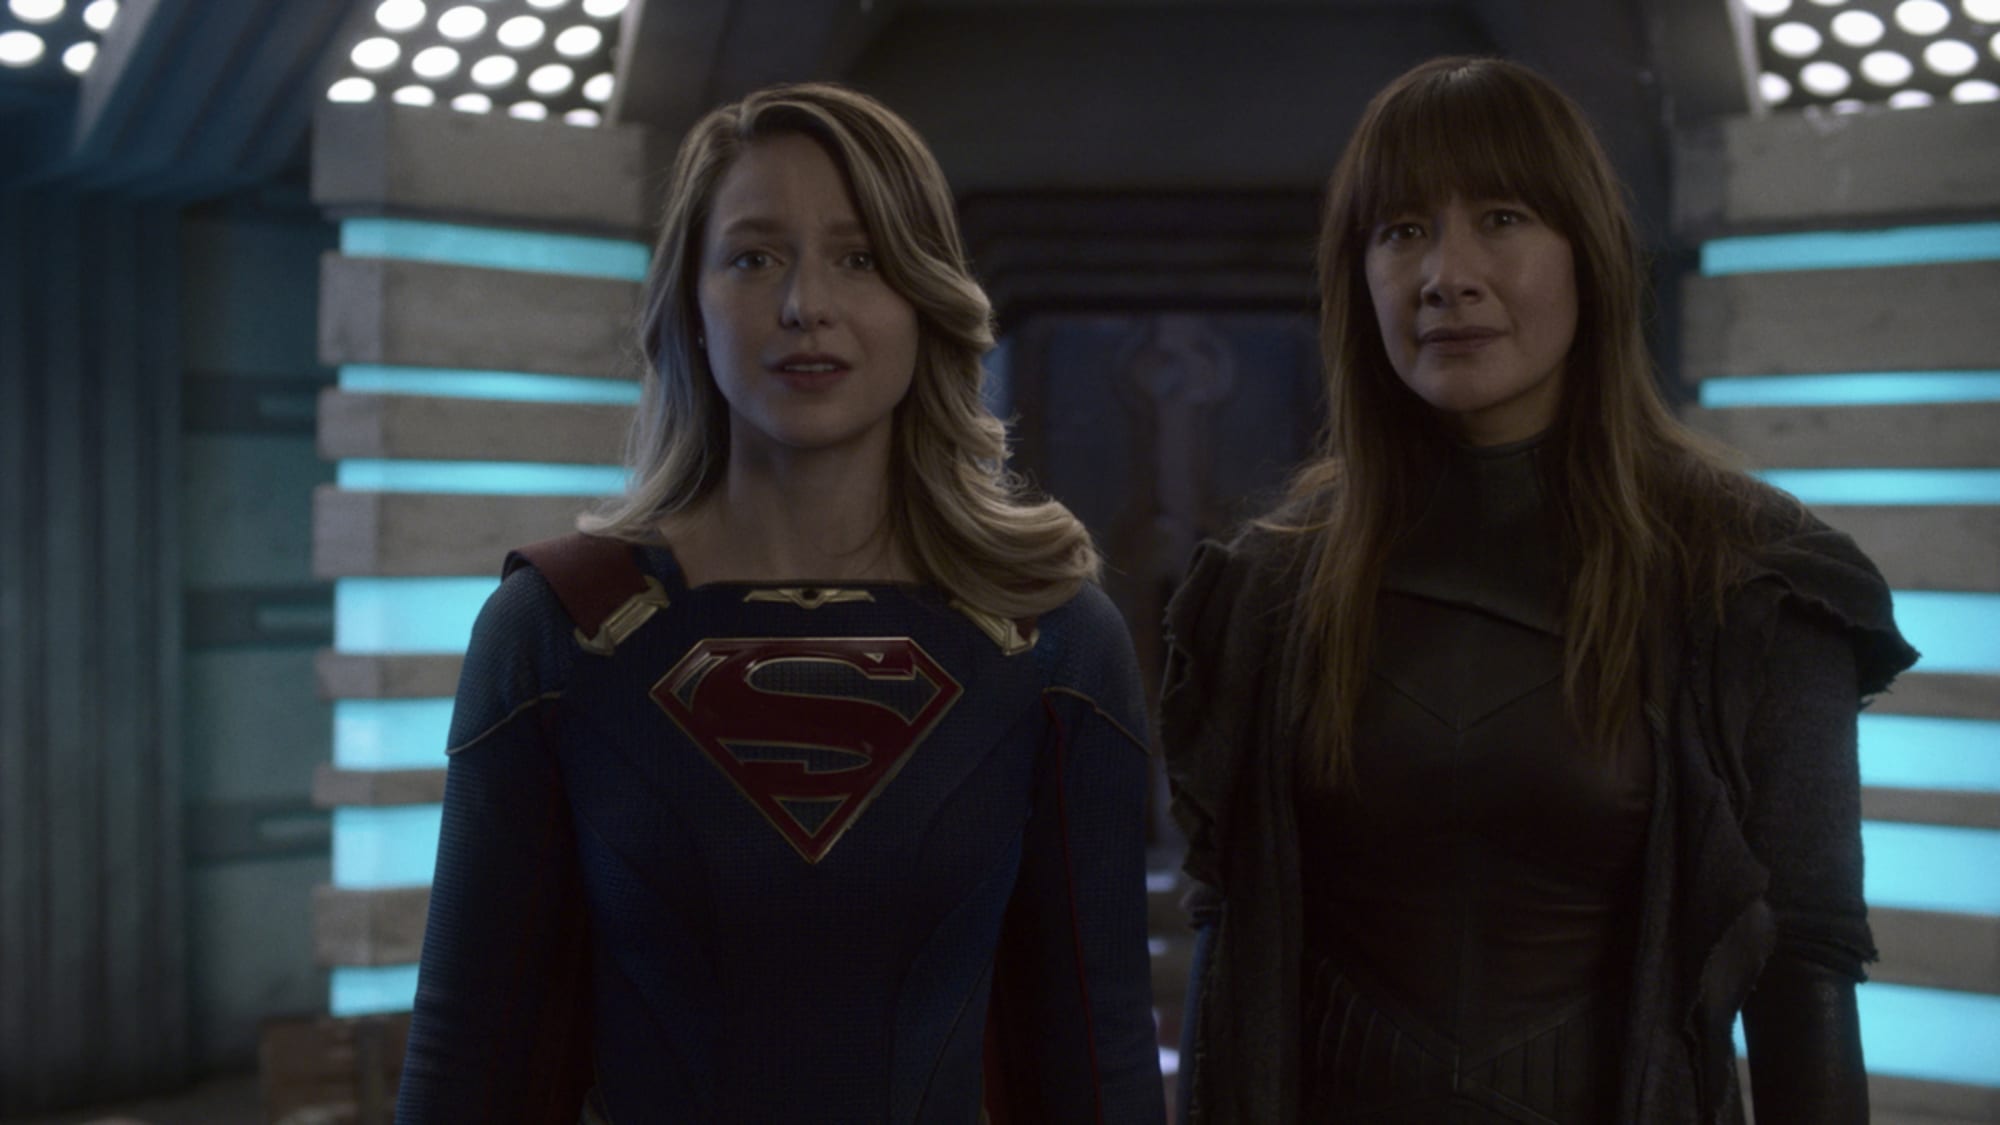 Supergirl season 6, episode 4 review: Going through the super motions